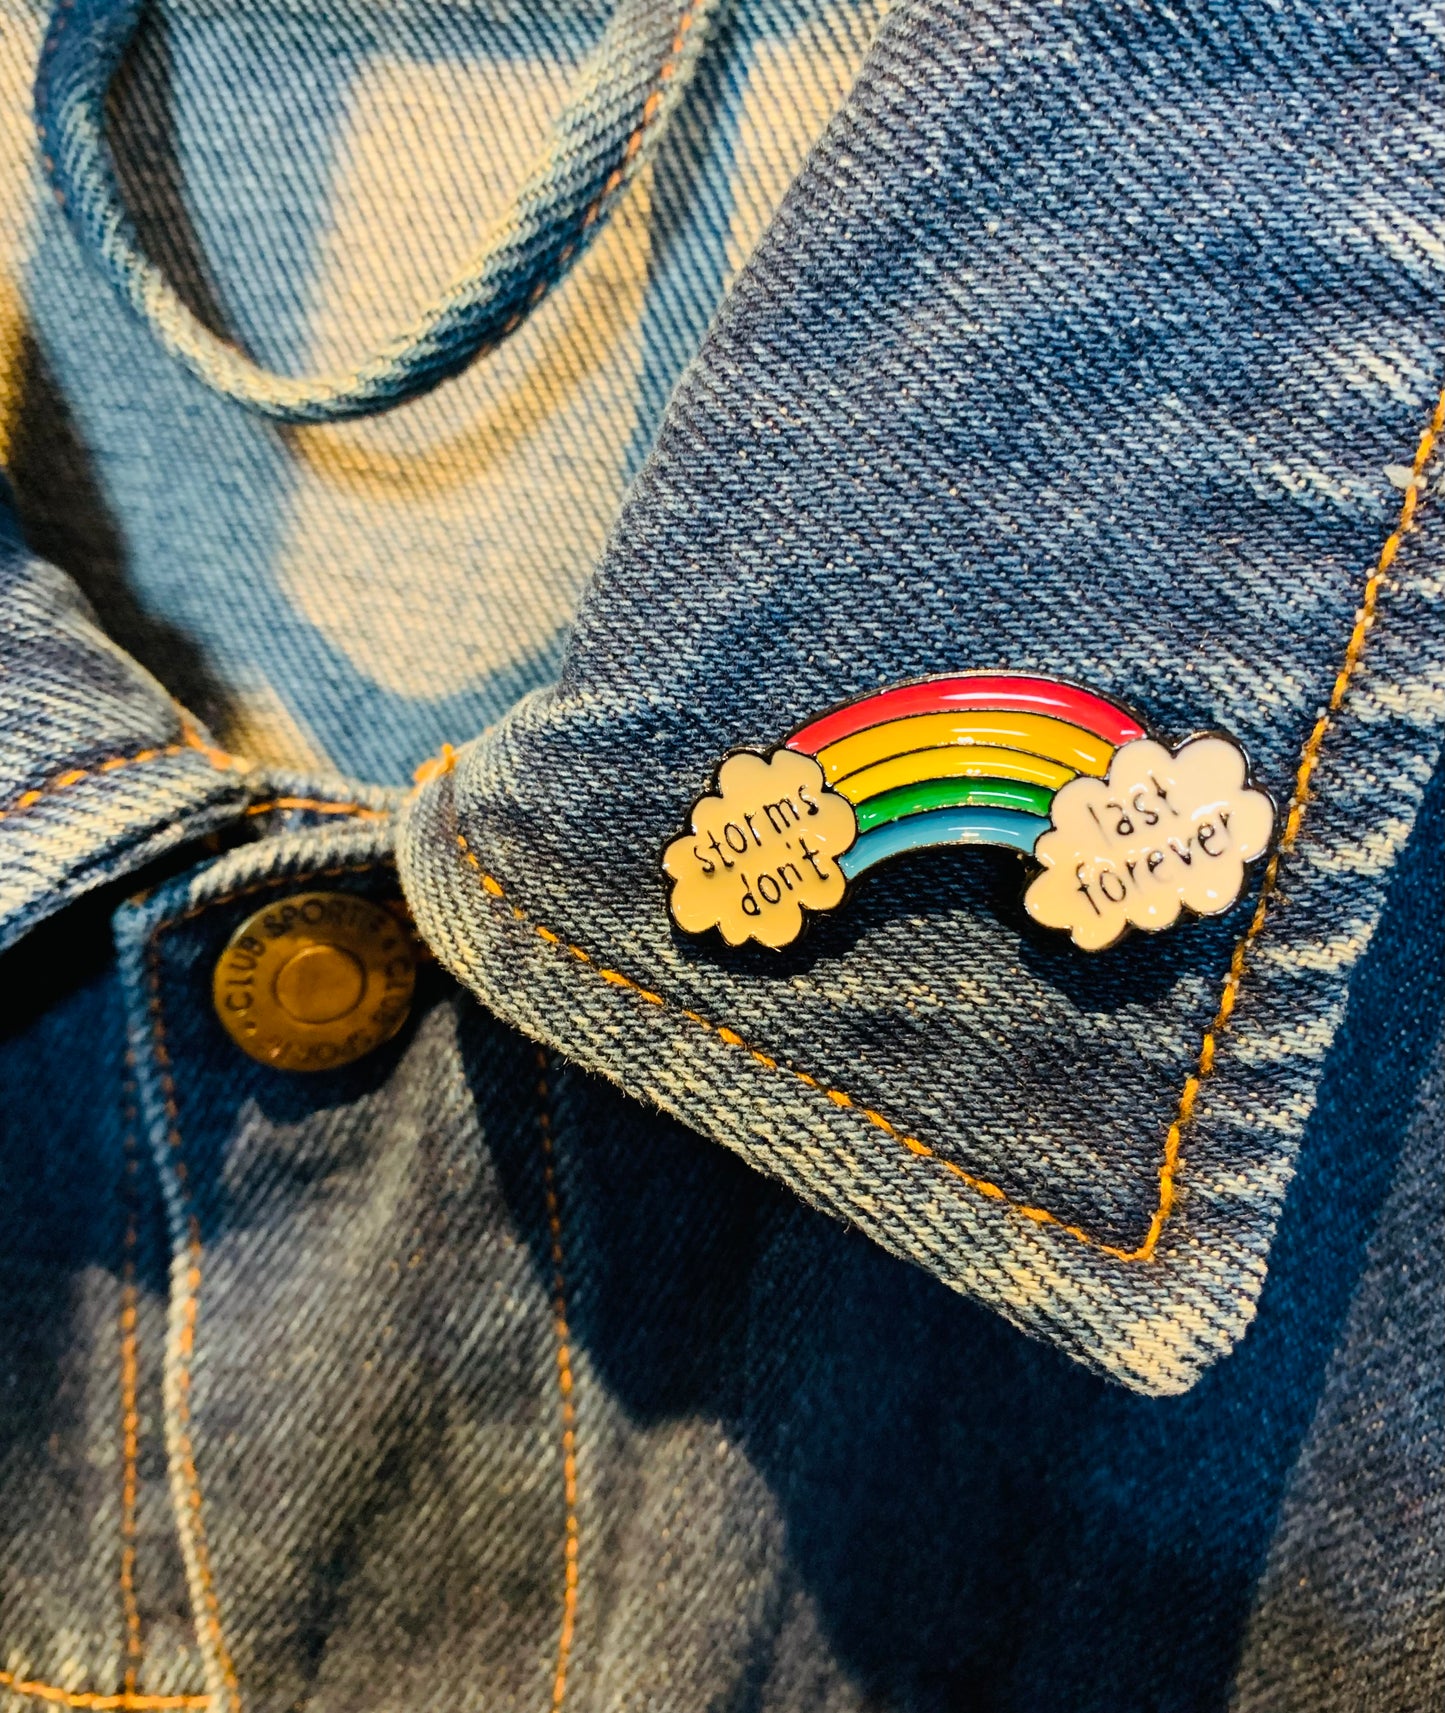 Rainbow “storms don’t last forever” pin badge